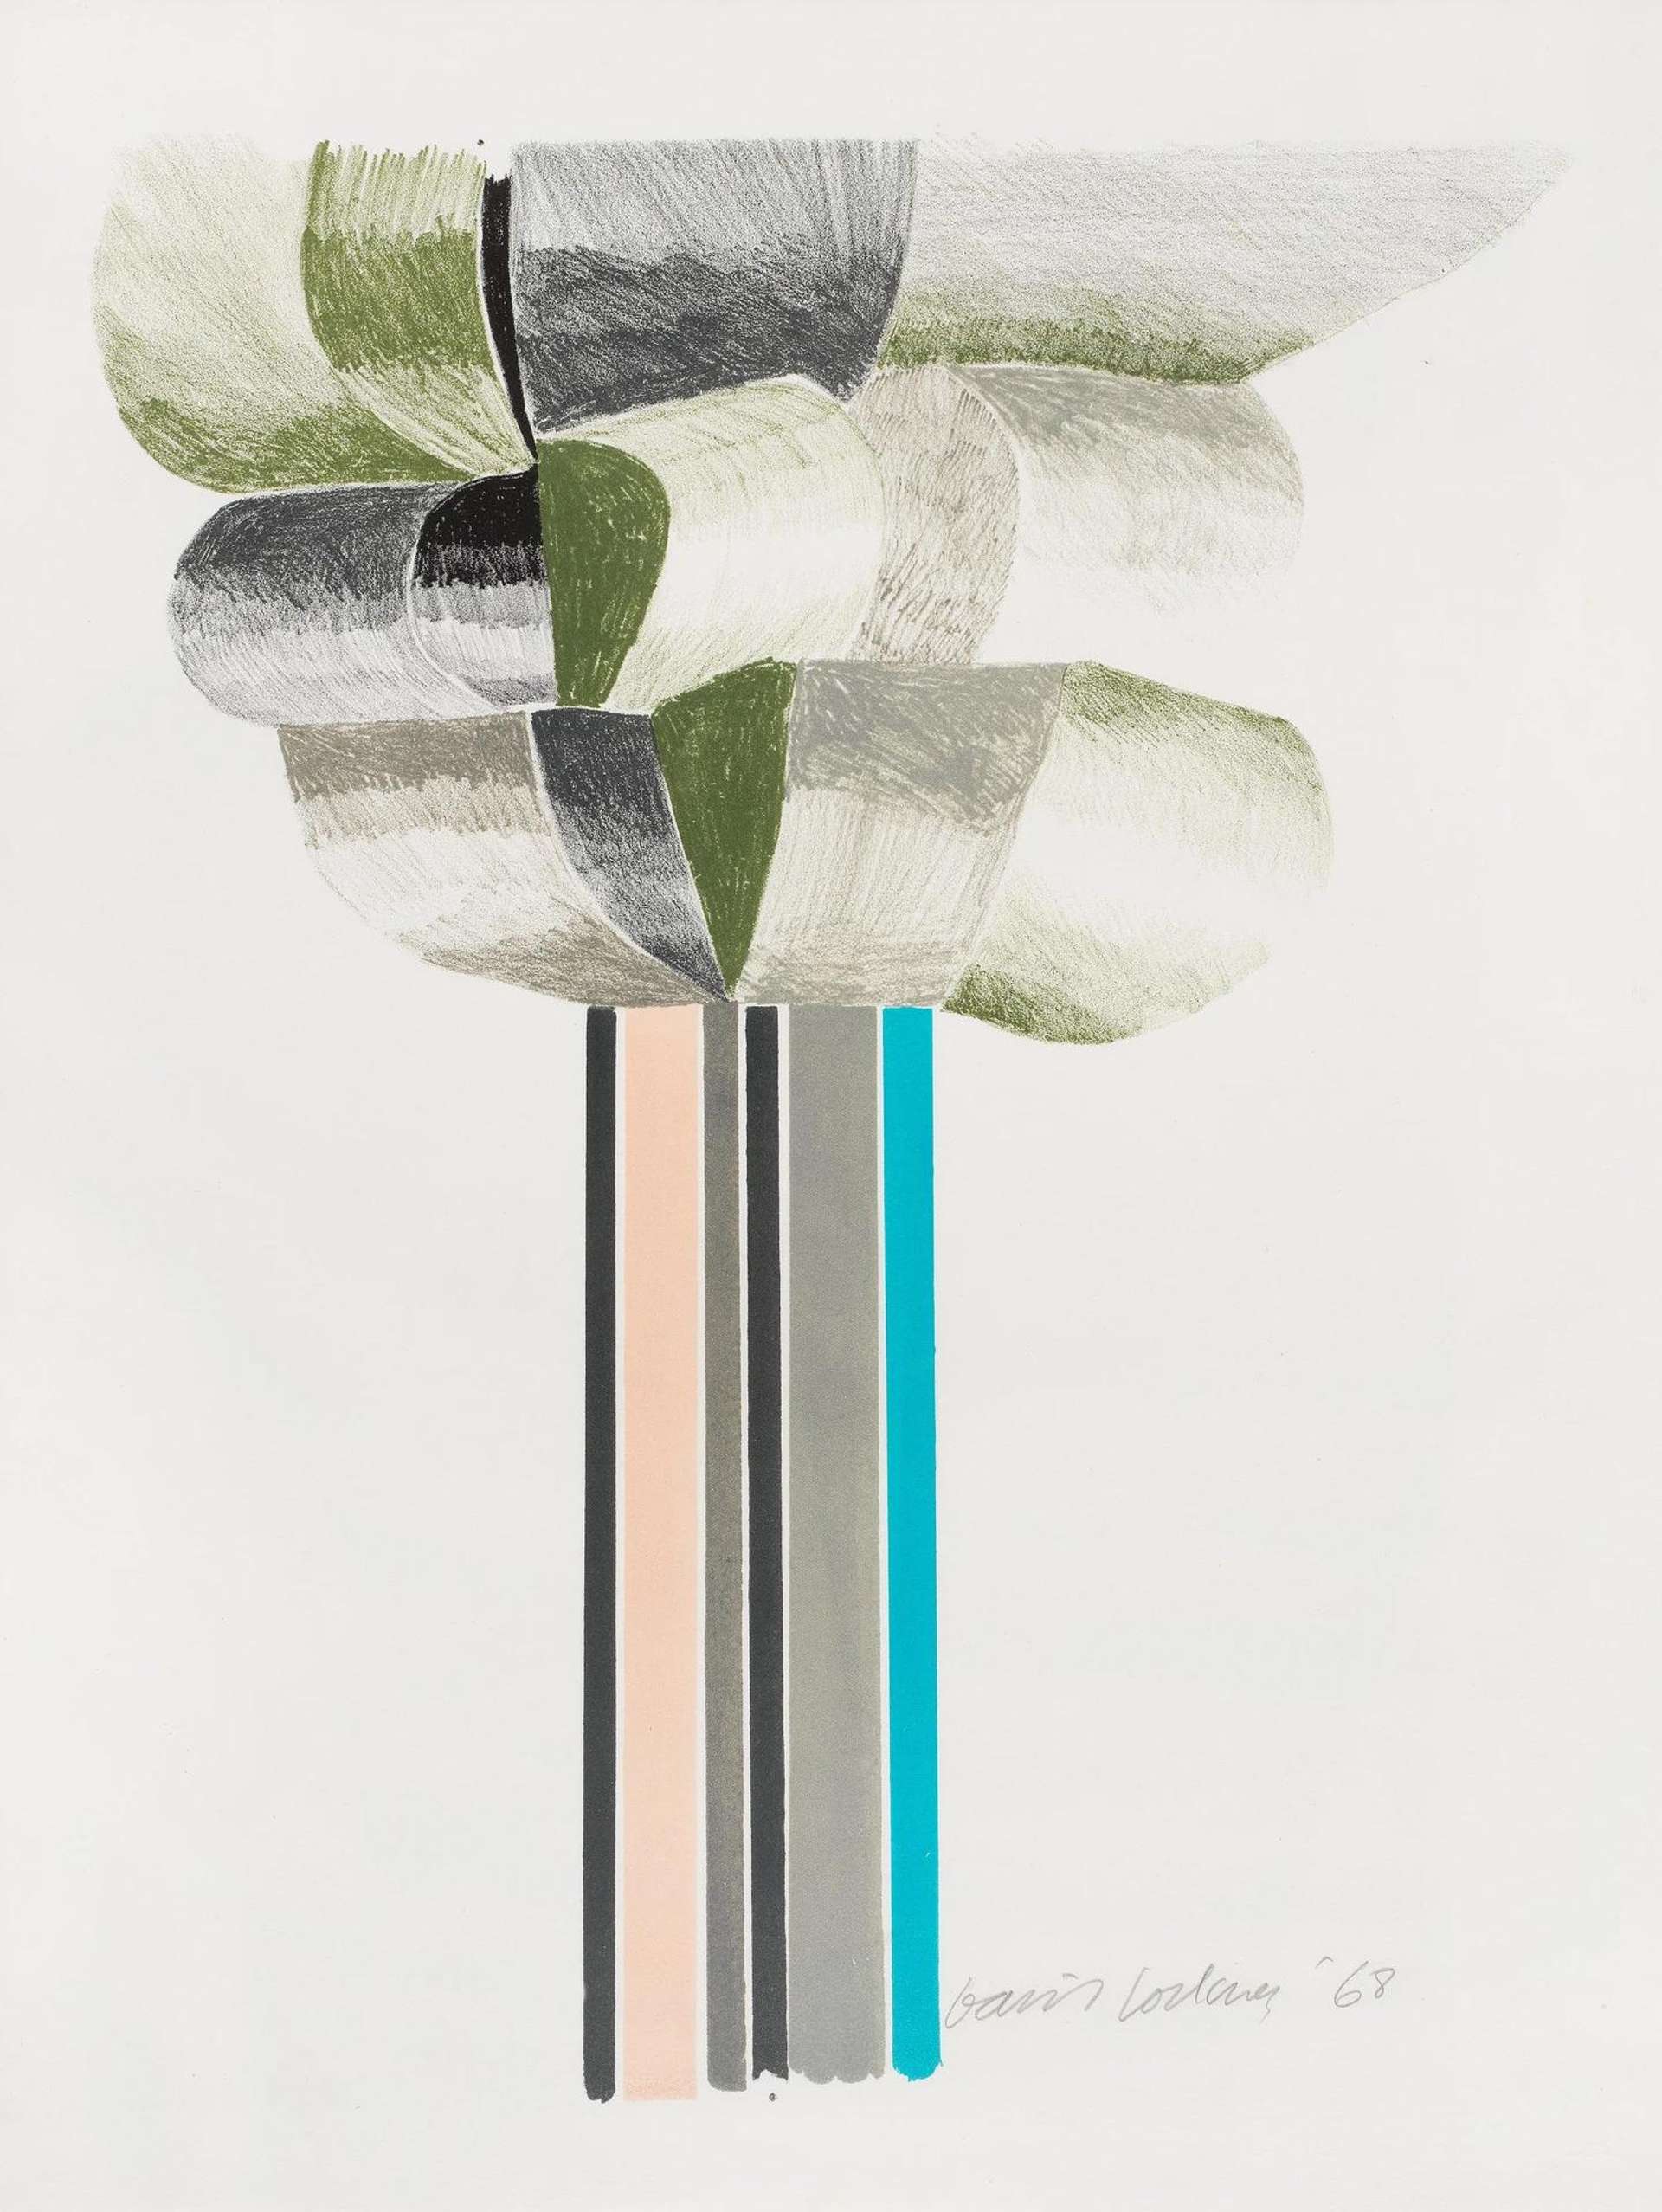 David Hockney’s Tree. A tree painted with grey and blue vertical stripes and ribbon like shapes of green and grey.